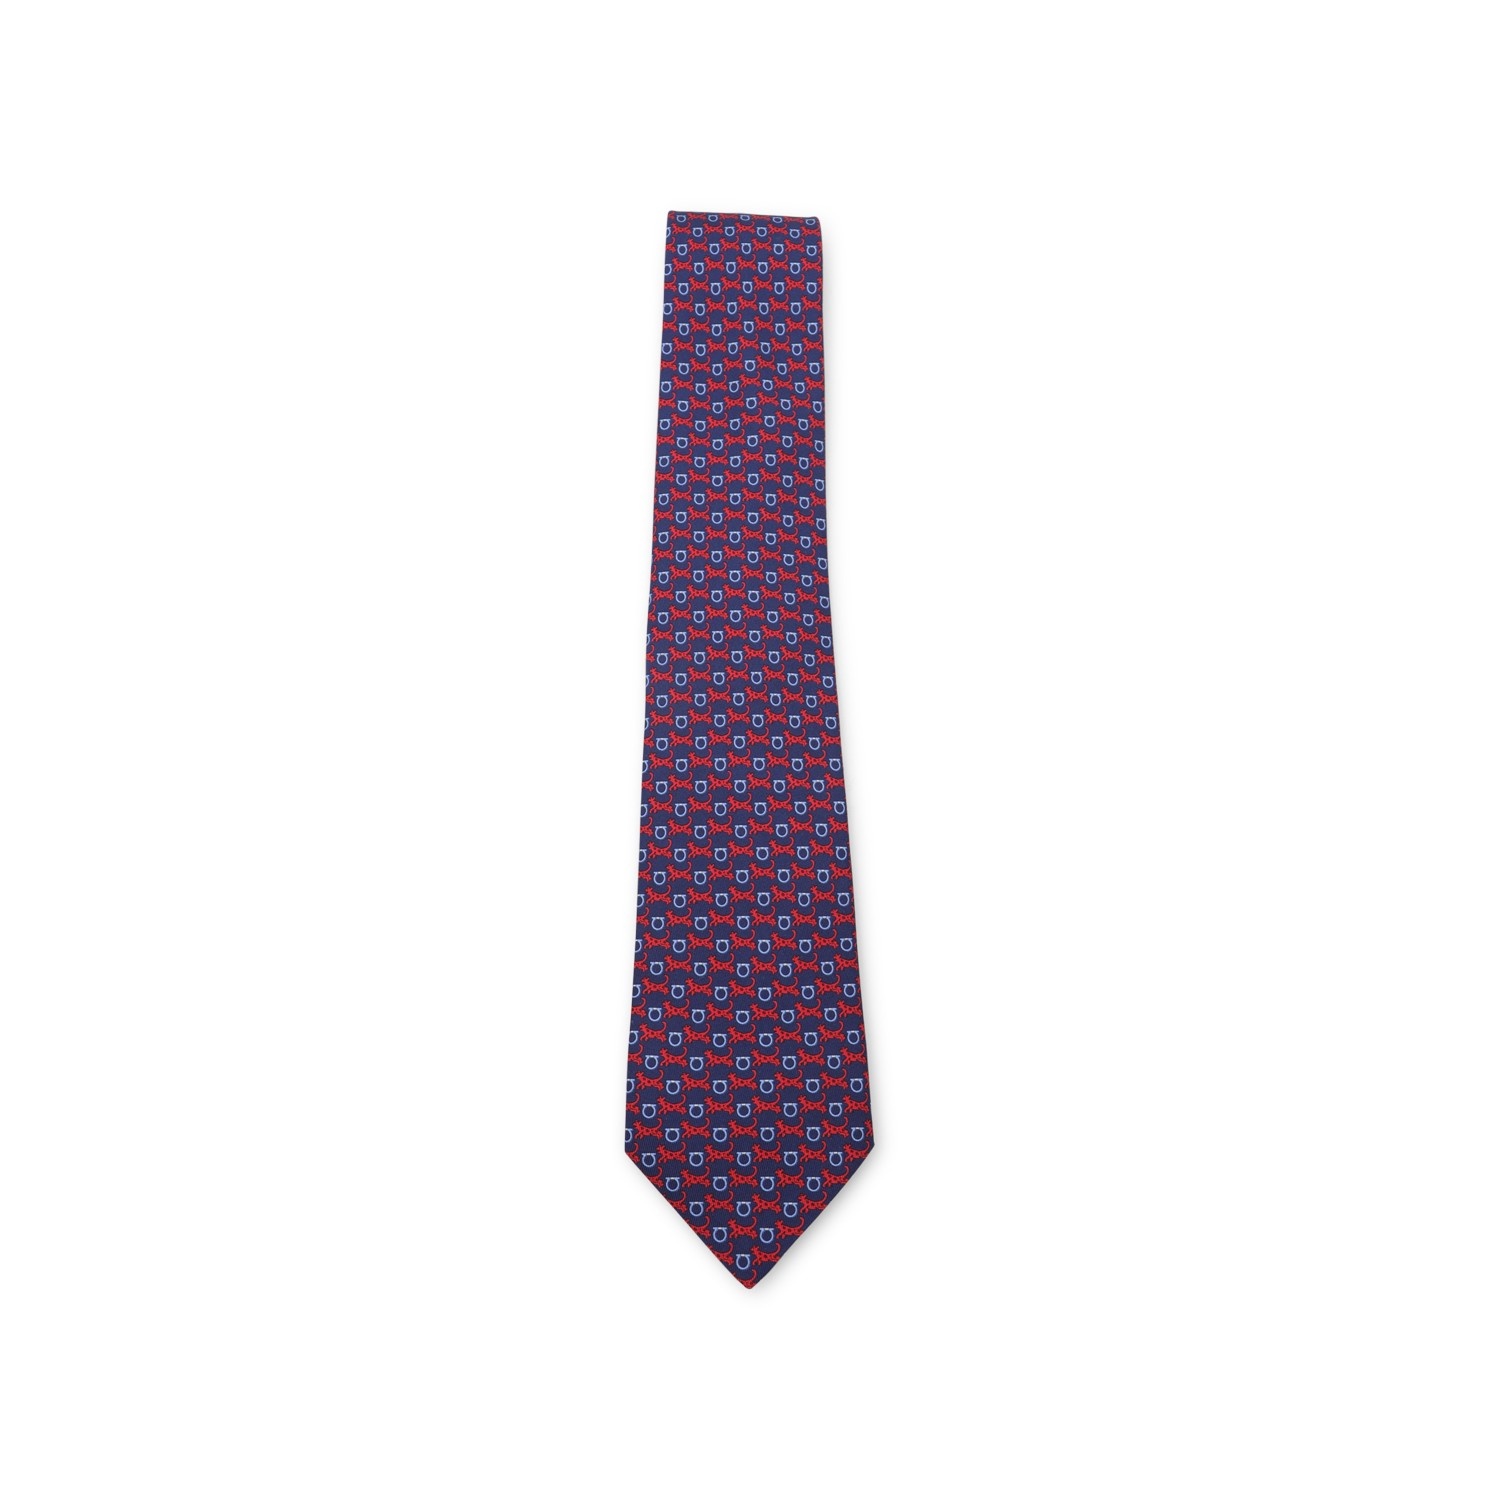 NAVY AND RED SILK TIE - 1